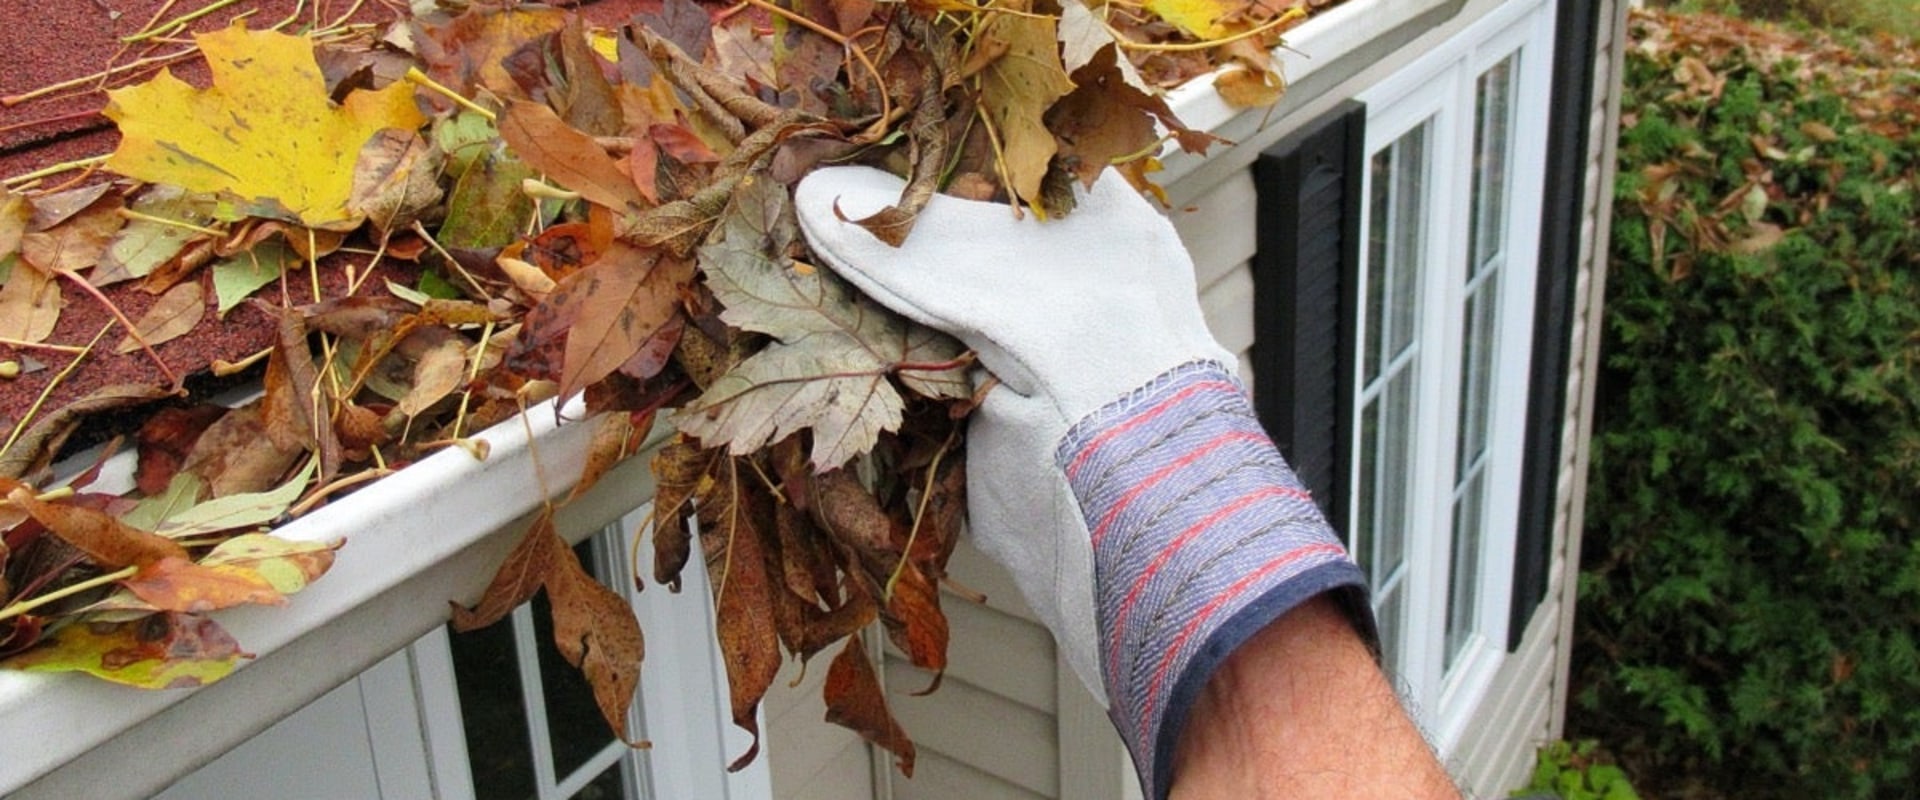 10 Essential Tips for Gutter Cleaning